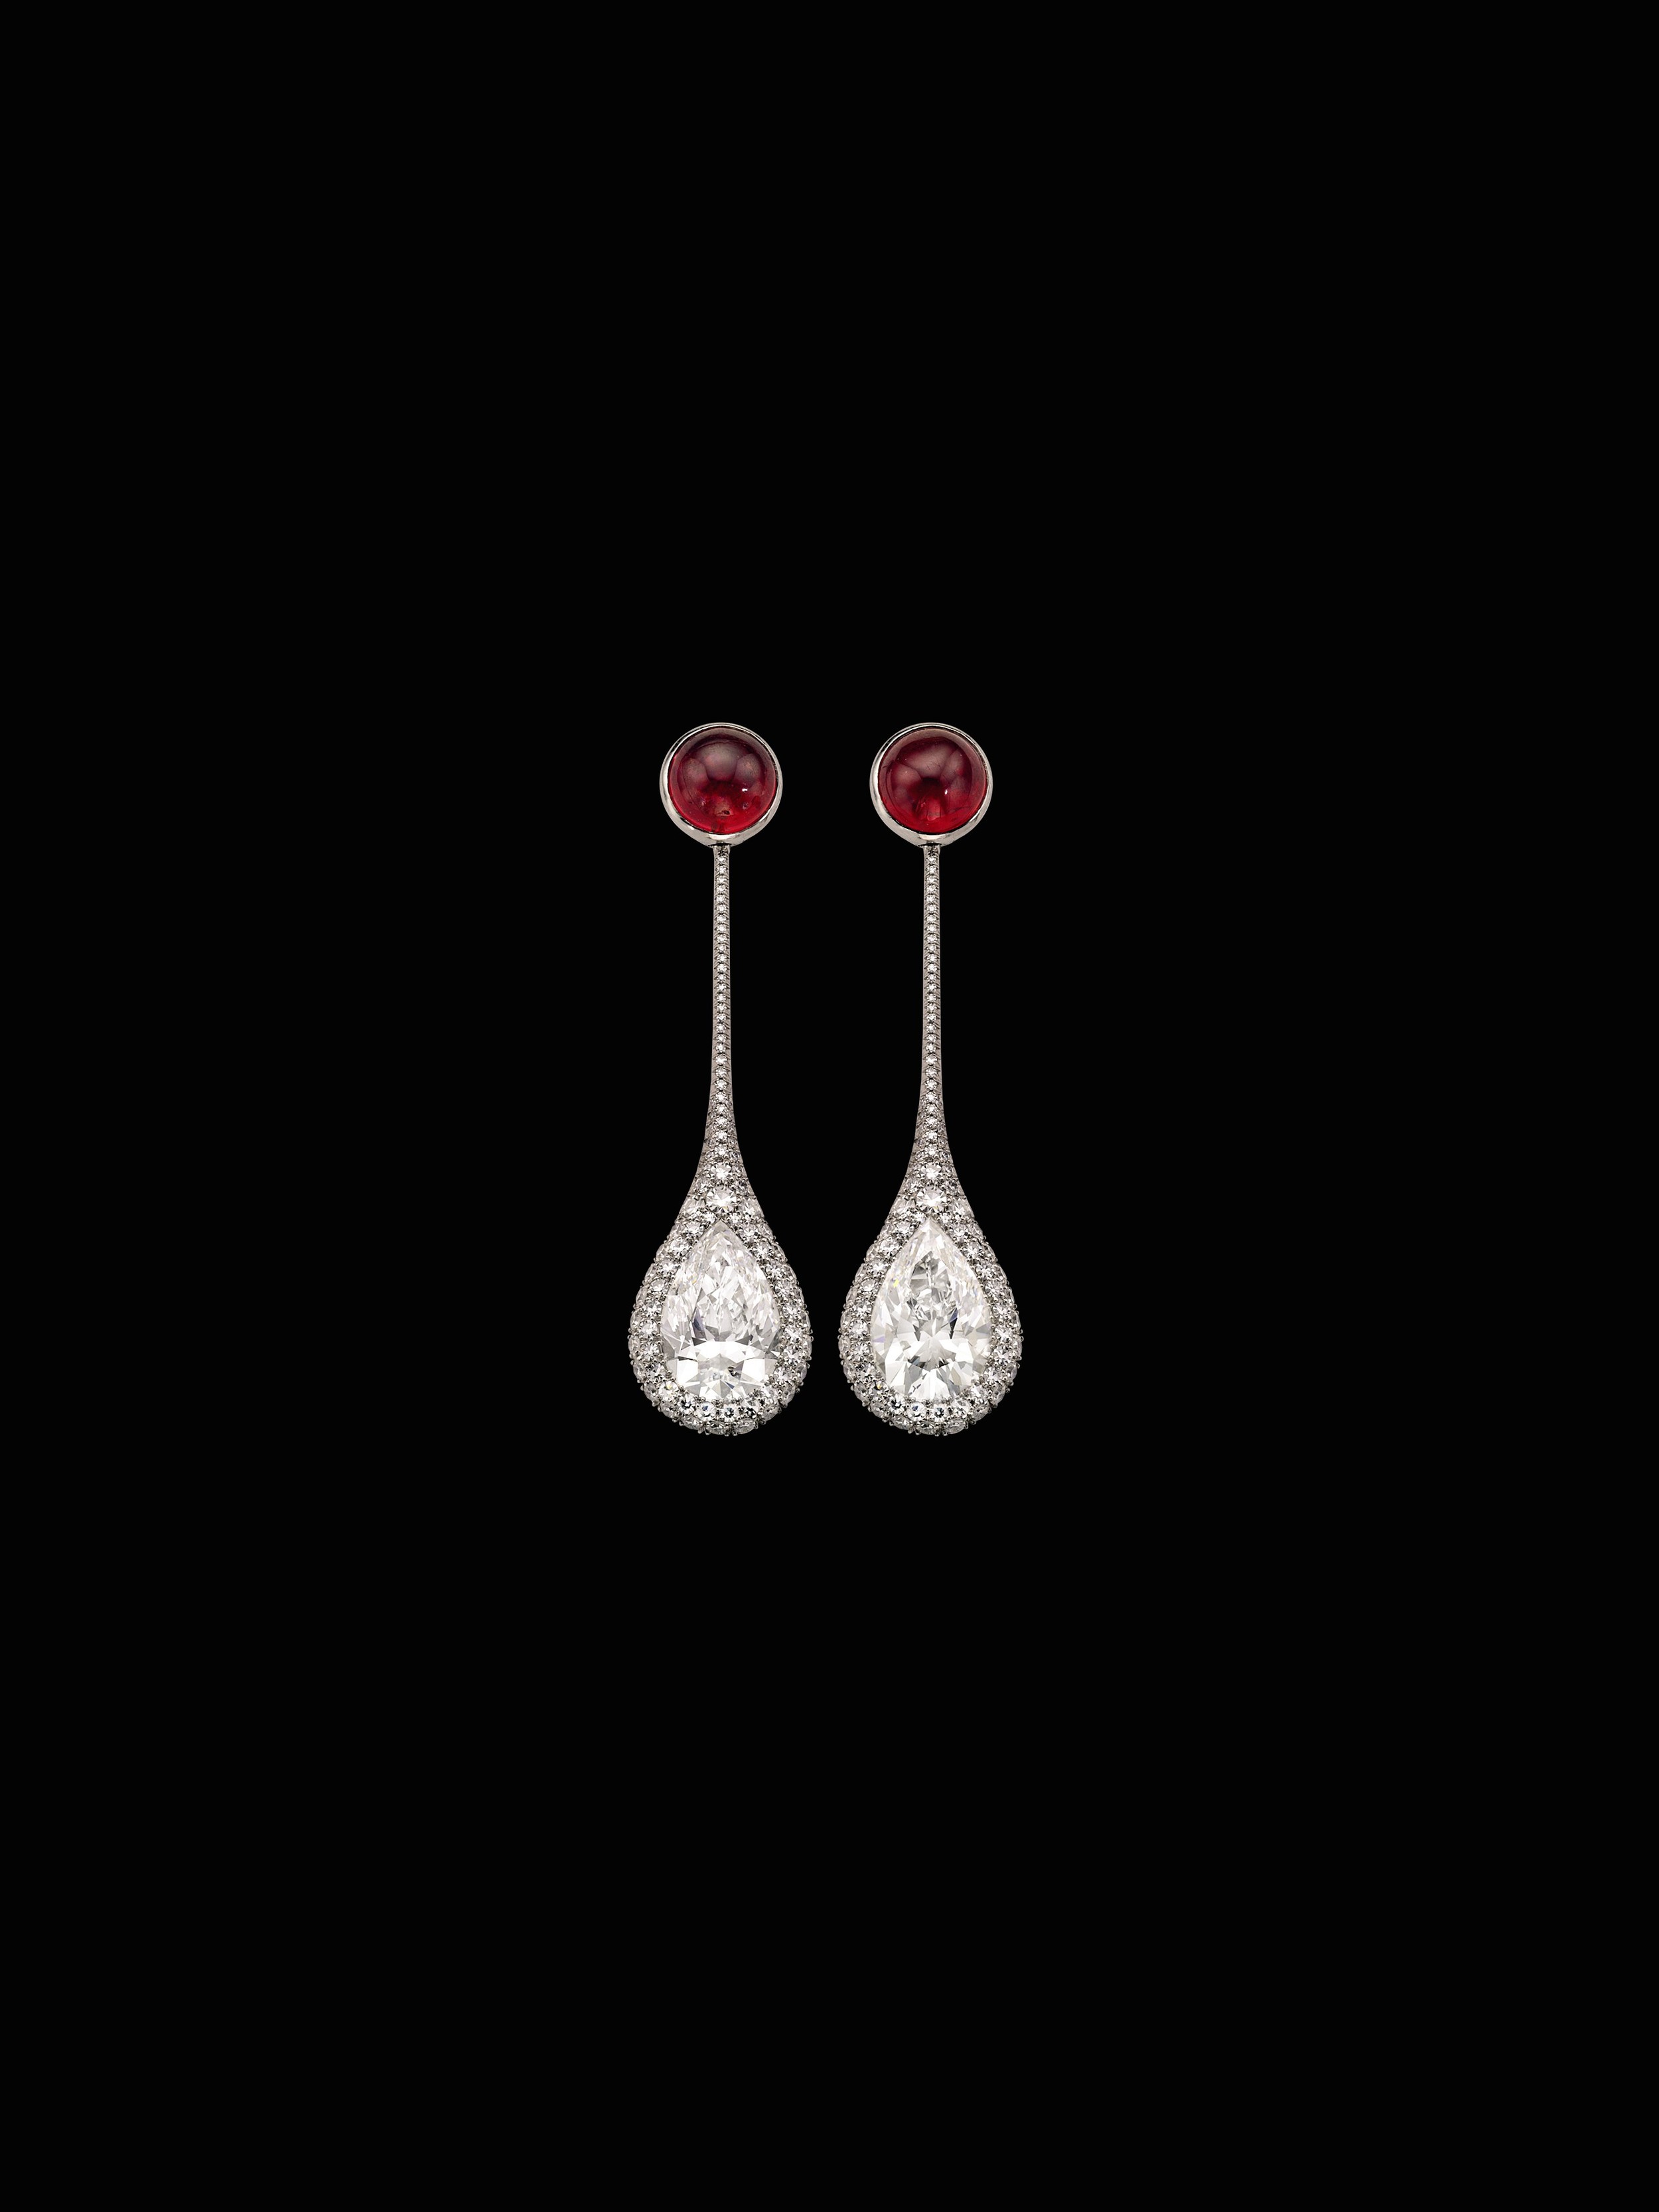  Earrings by Taffin for Sotheby's.&nbsp; 